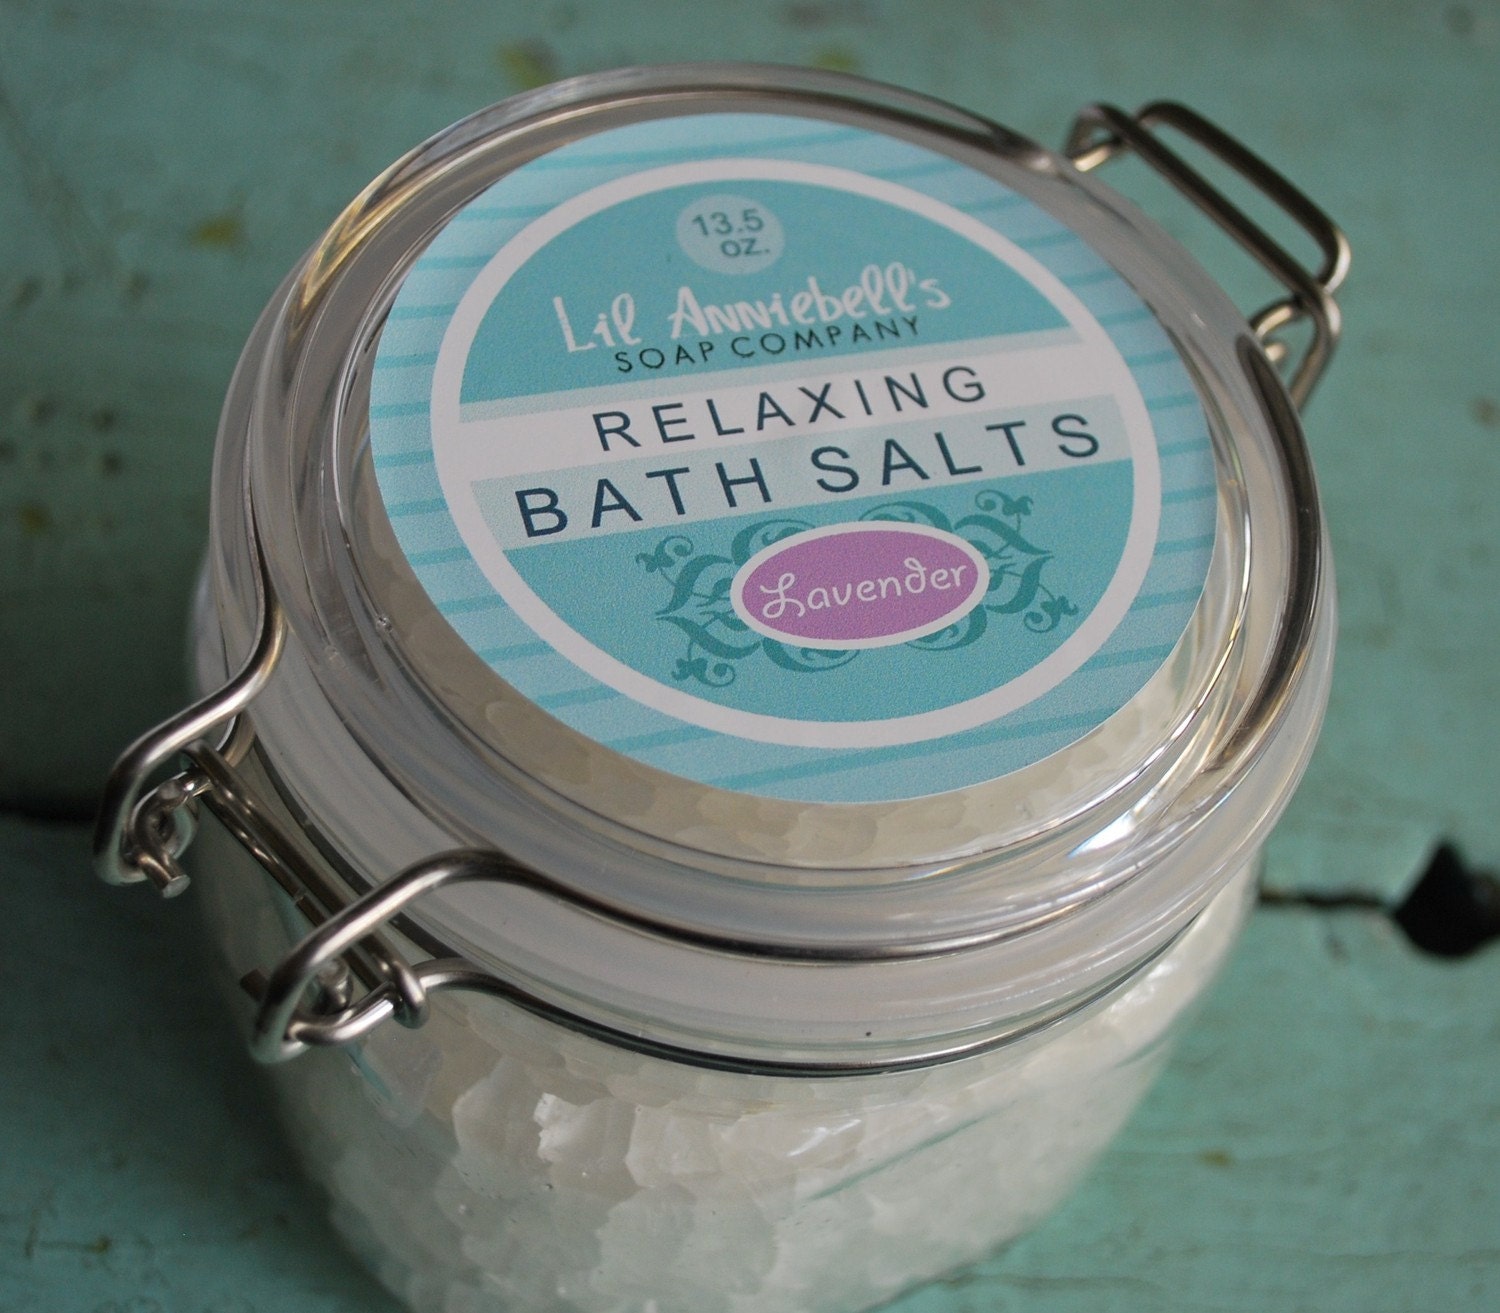 Relaxing Bath Salts with Lavender Essential Oil